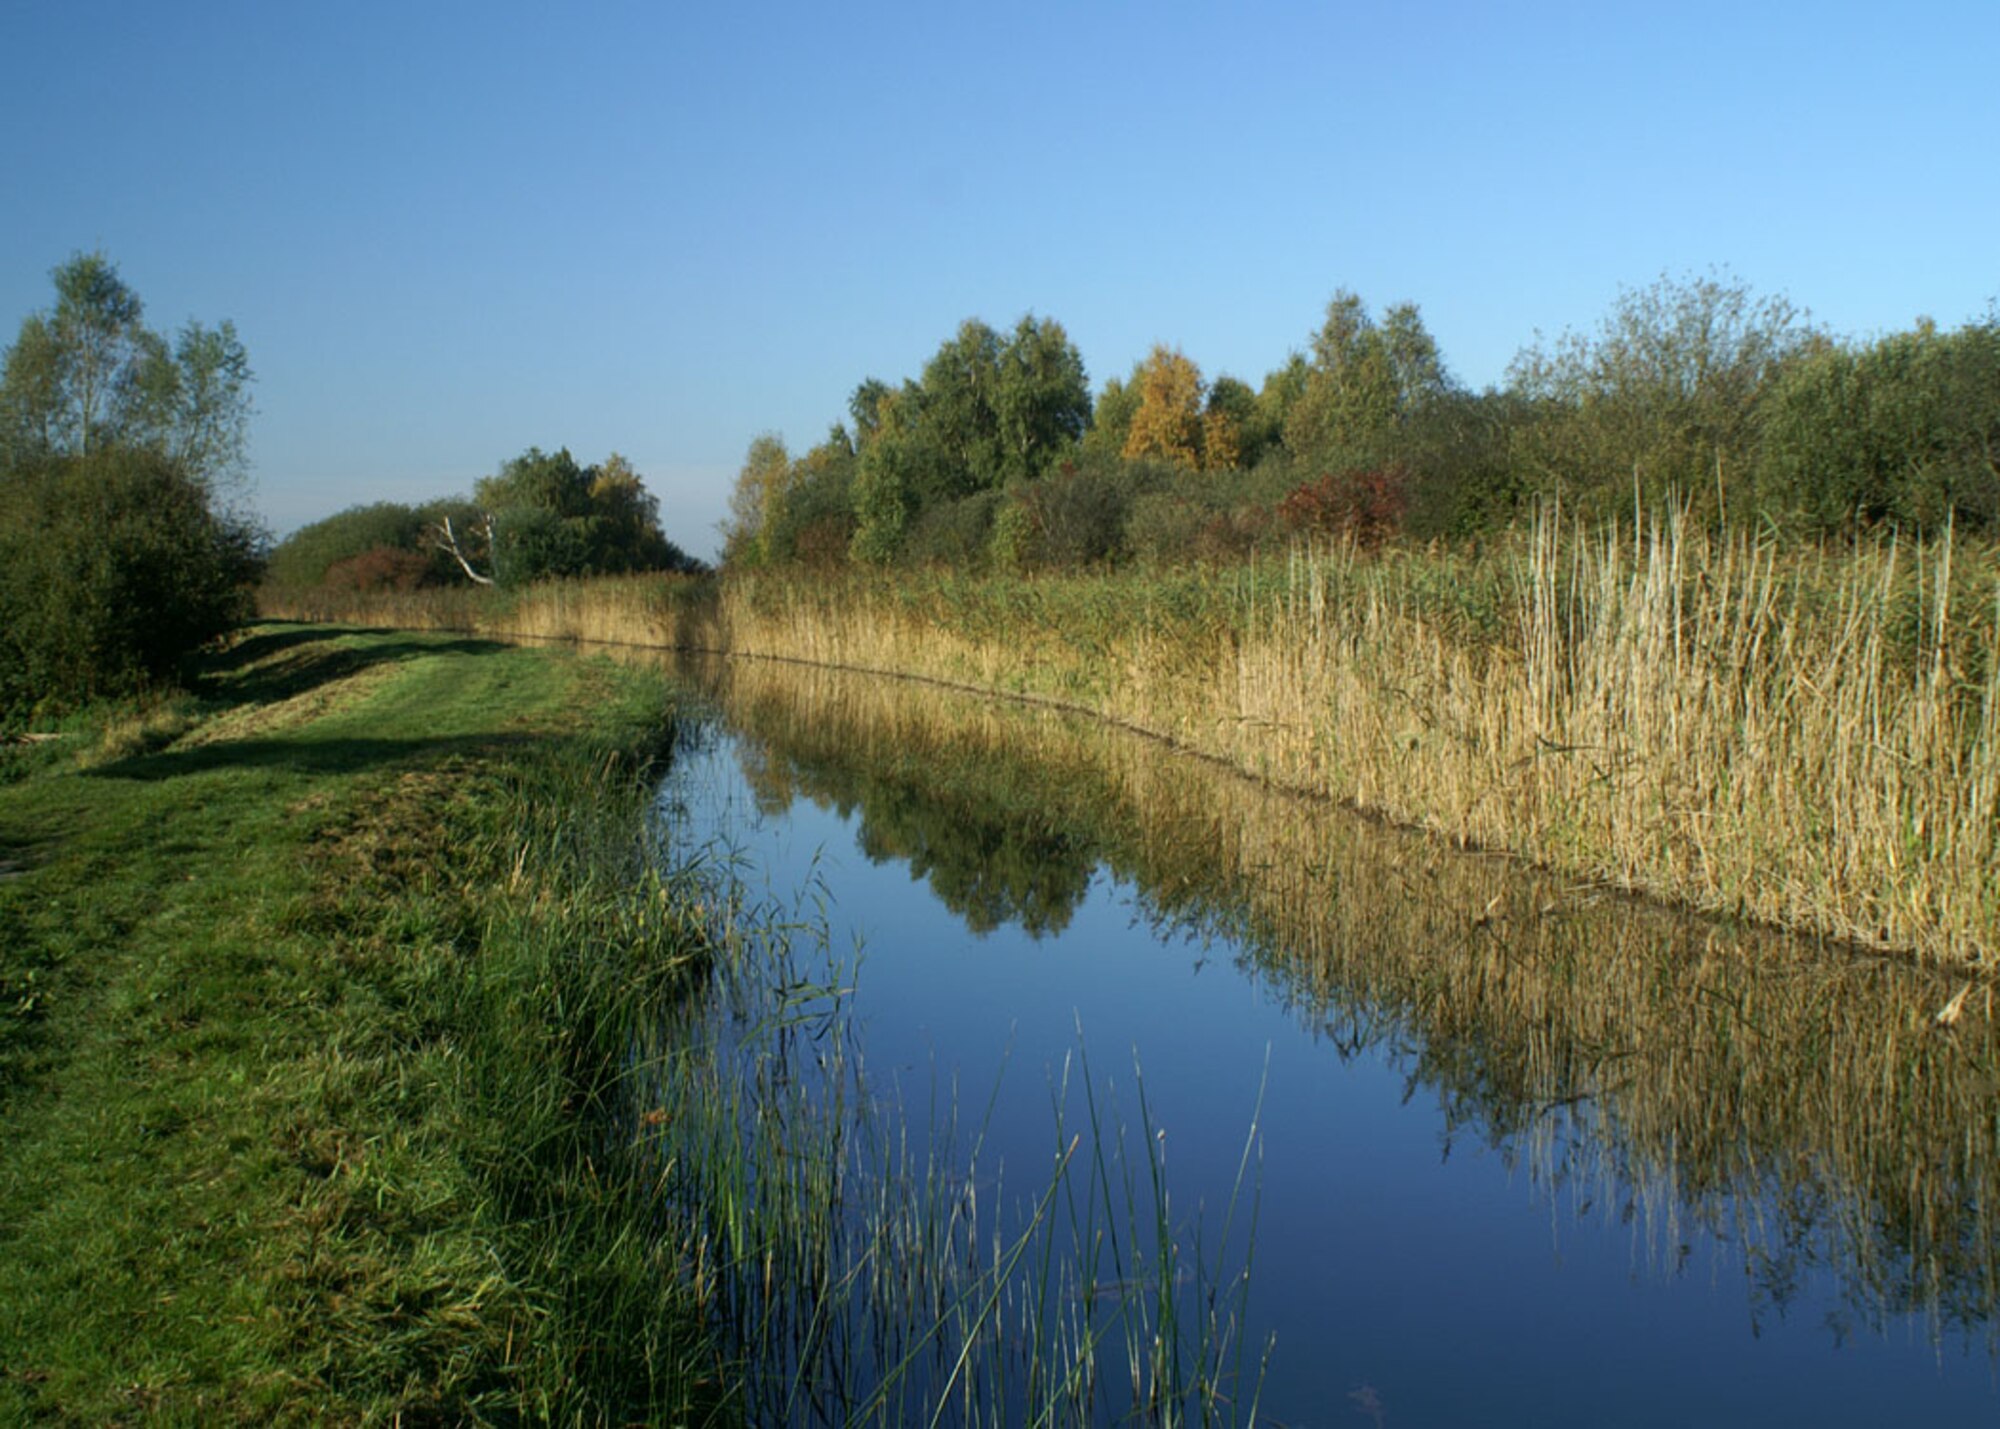 Wicken Fen National Nature Reserve near the Cambridge - Suffolk border, is one of the few pieces of Sedge Fen remaining in England. (U.S. Air Force photo by Judith Wakelam)